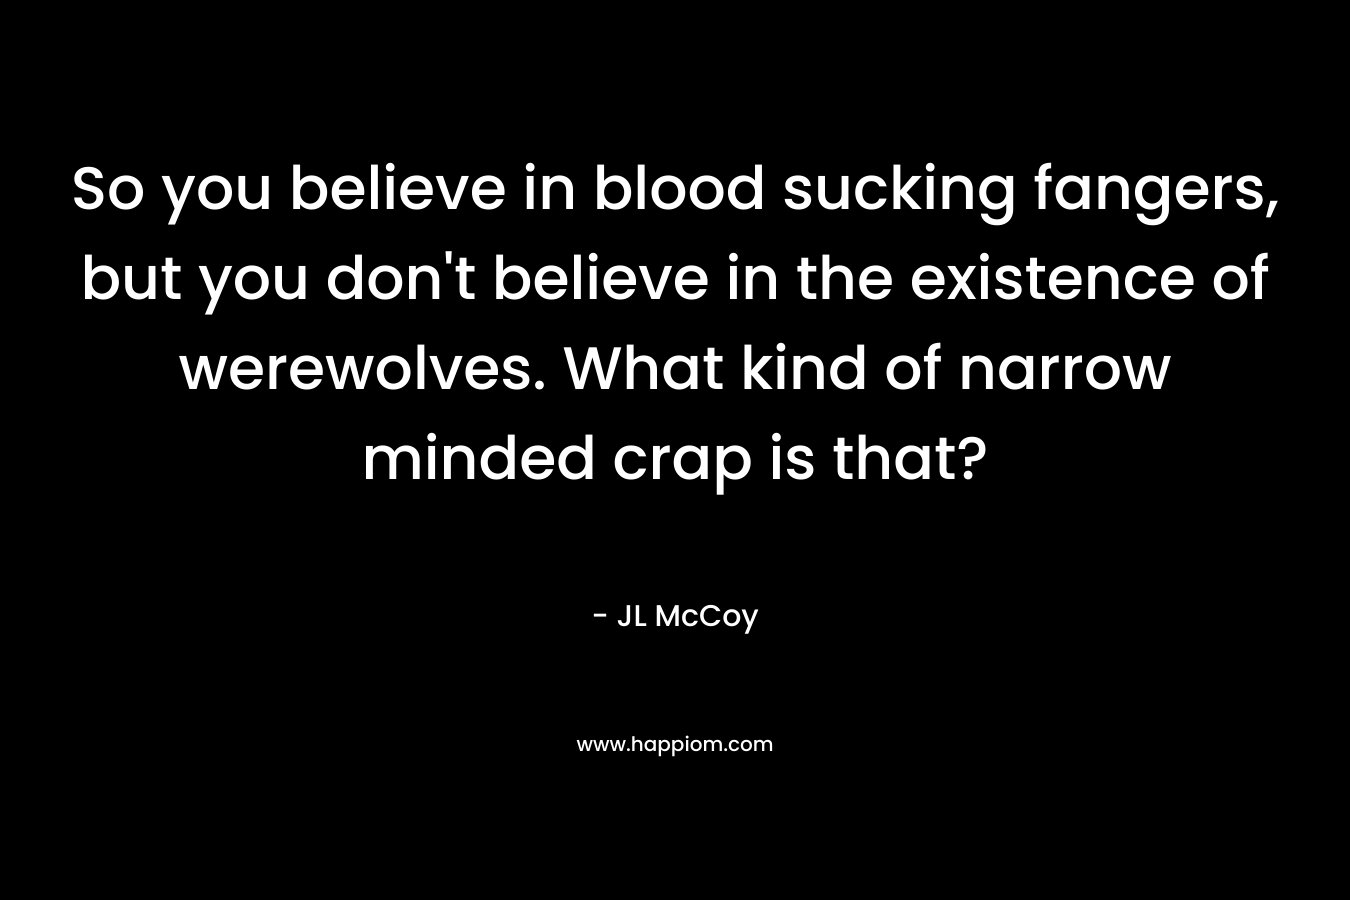 So you believe in blood sucking fangers, but you don’t believe in the existence of werewolves. What kind of narrow minded crap is that? – JL McCoy